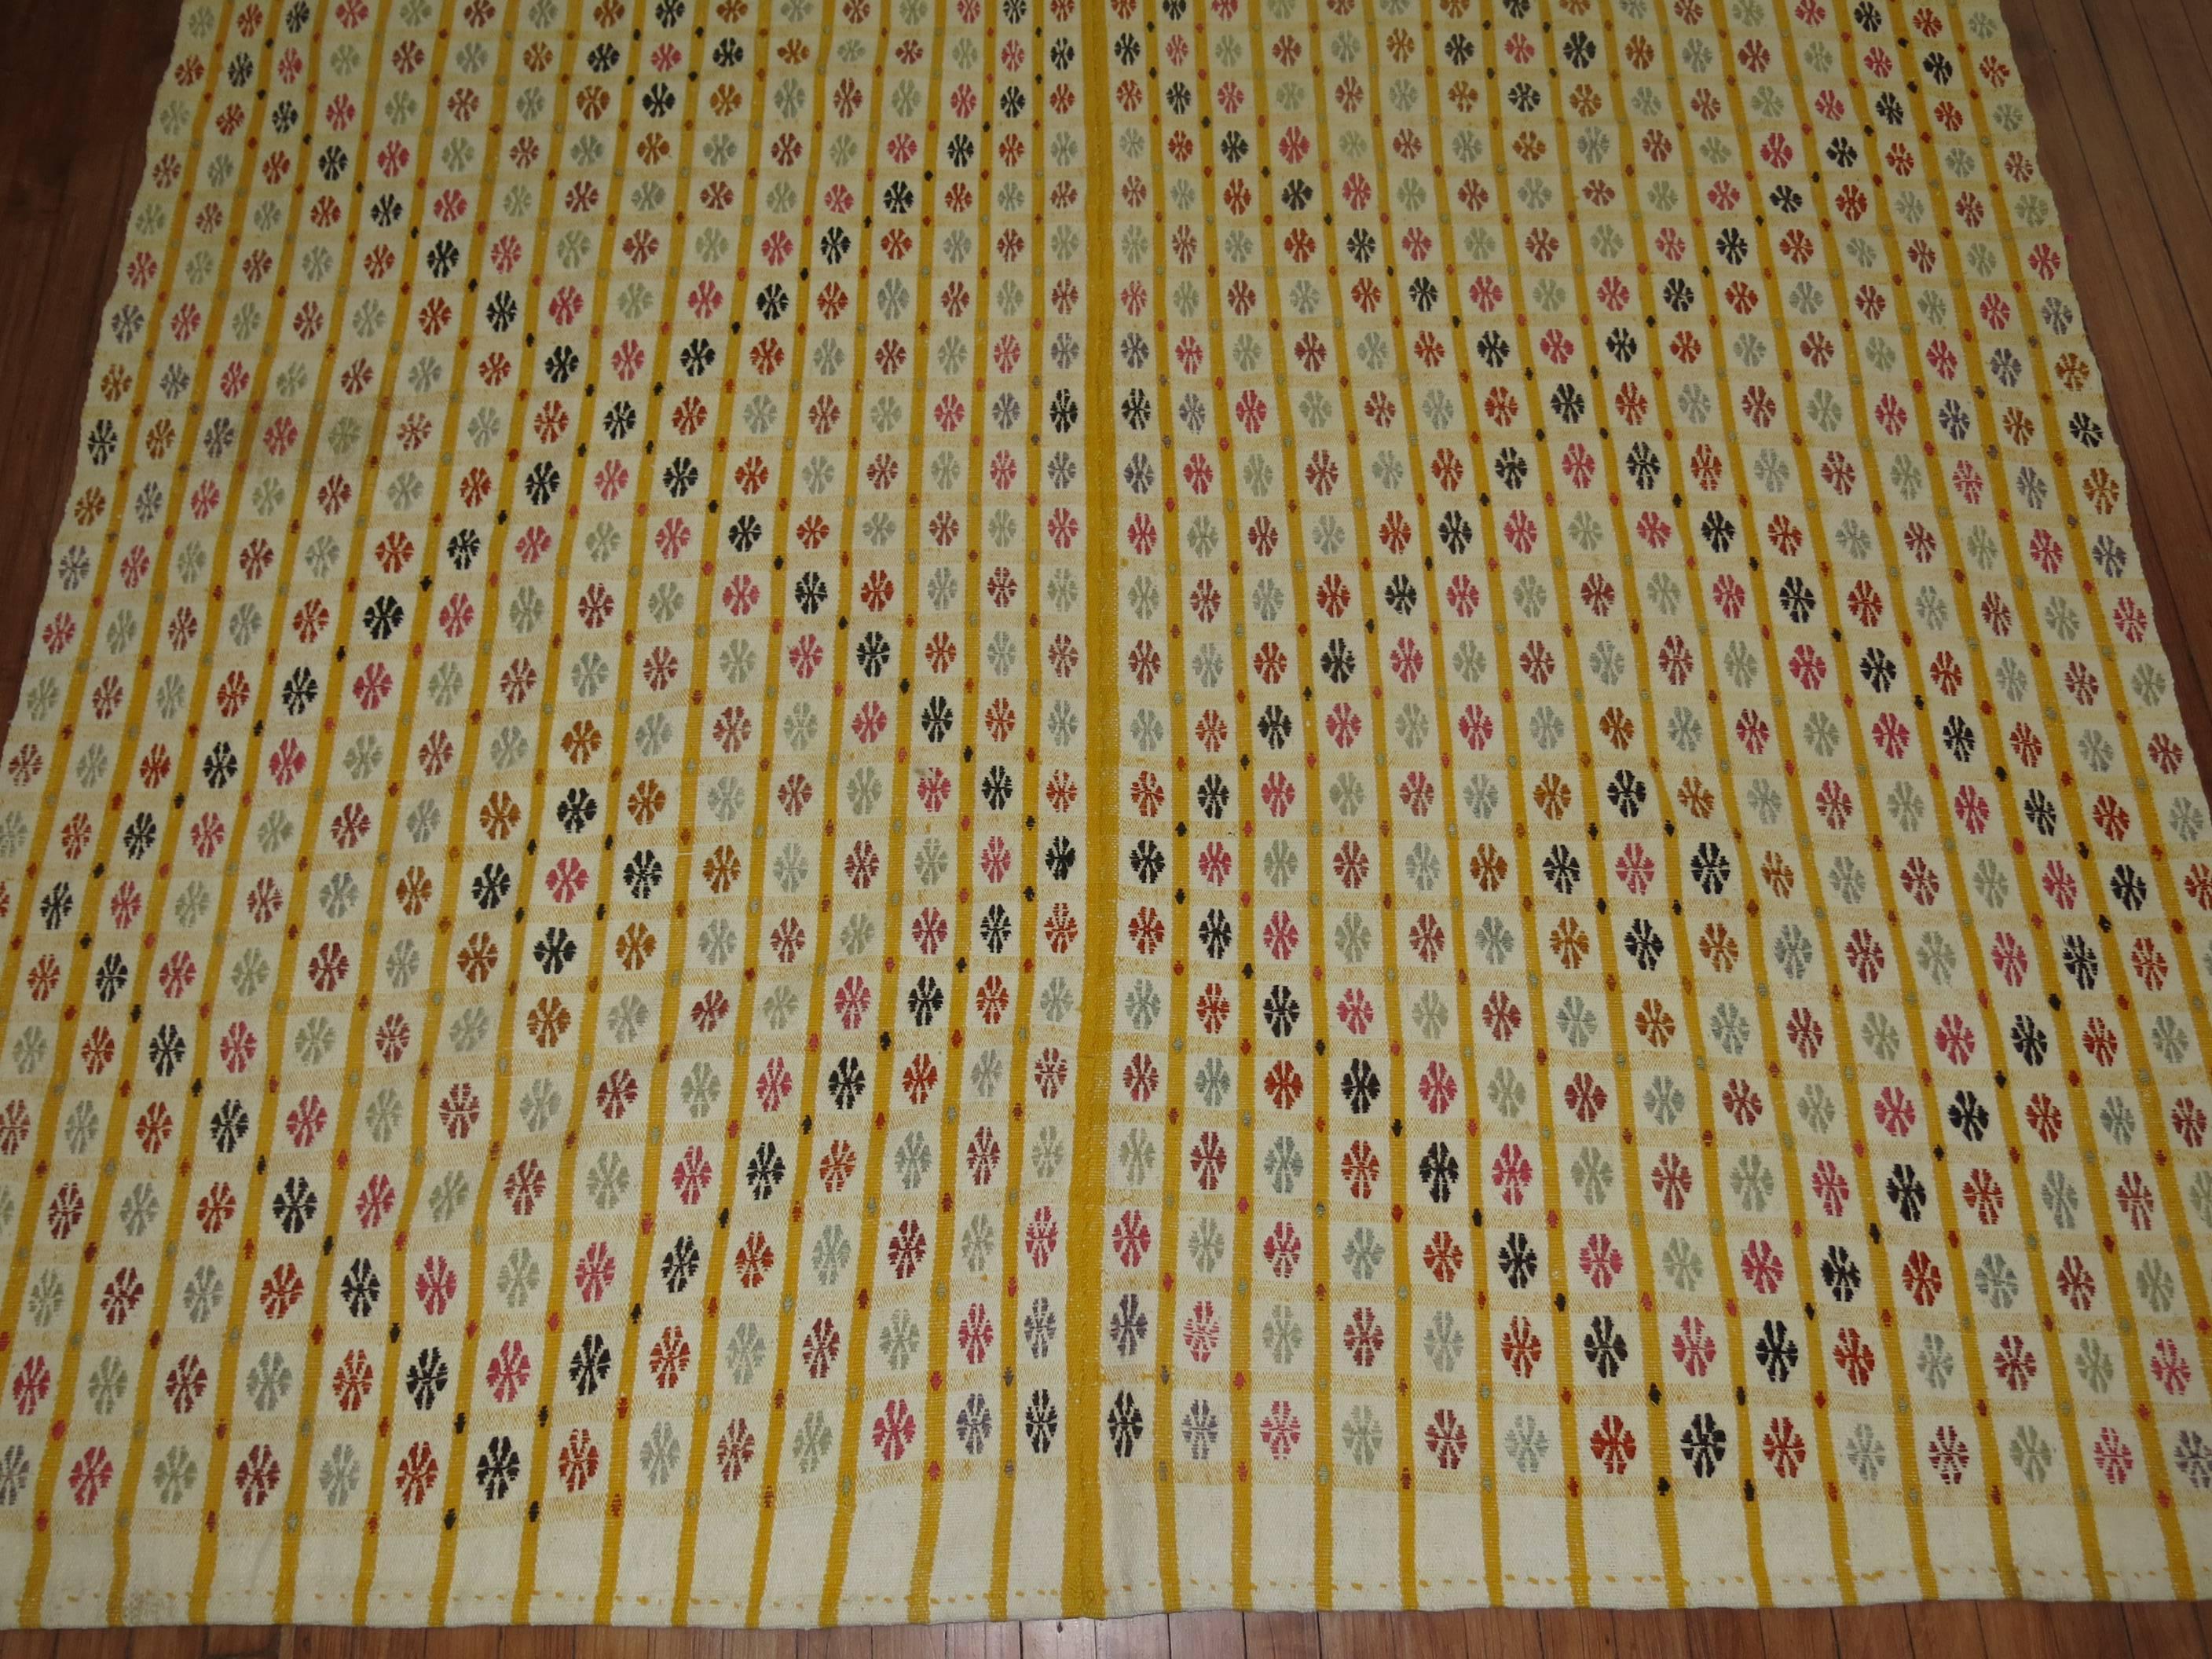 A colorful geometric flat-weave jajim /cicim woven technique from Southern part of Turkey.

Measures: 6'10'' x 9'10''

Turkish Cicims are primarily used as curtains or blankets. The weft and warp threads that make up the base are usually in the